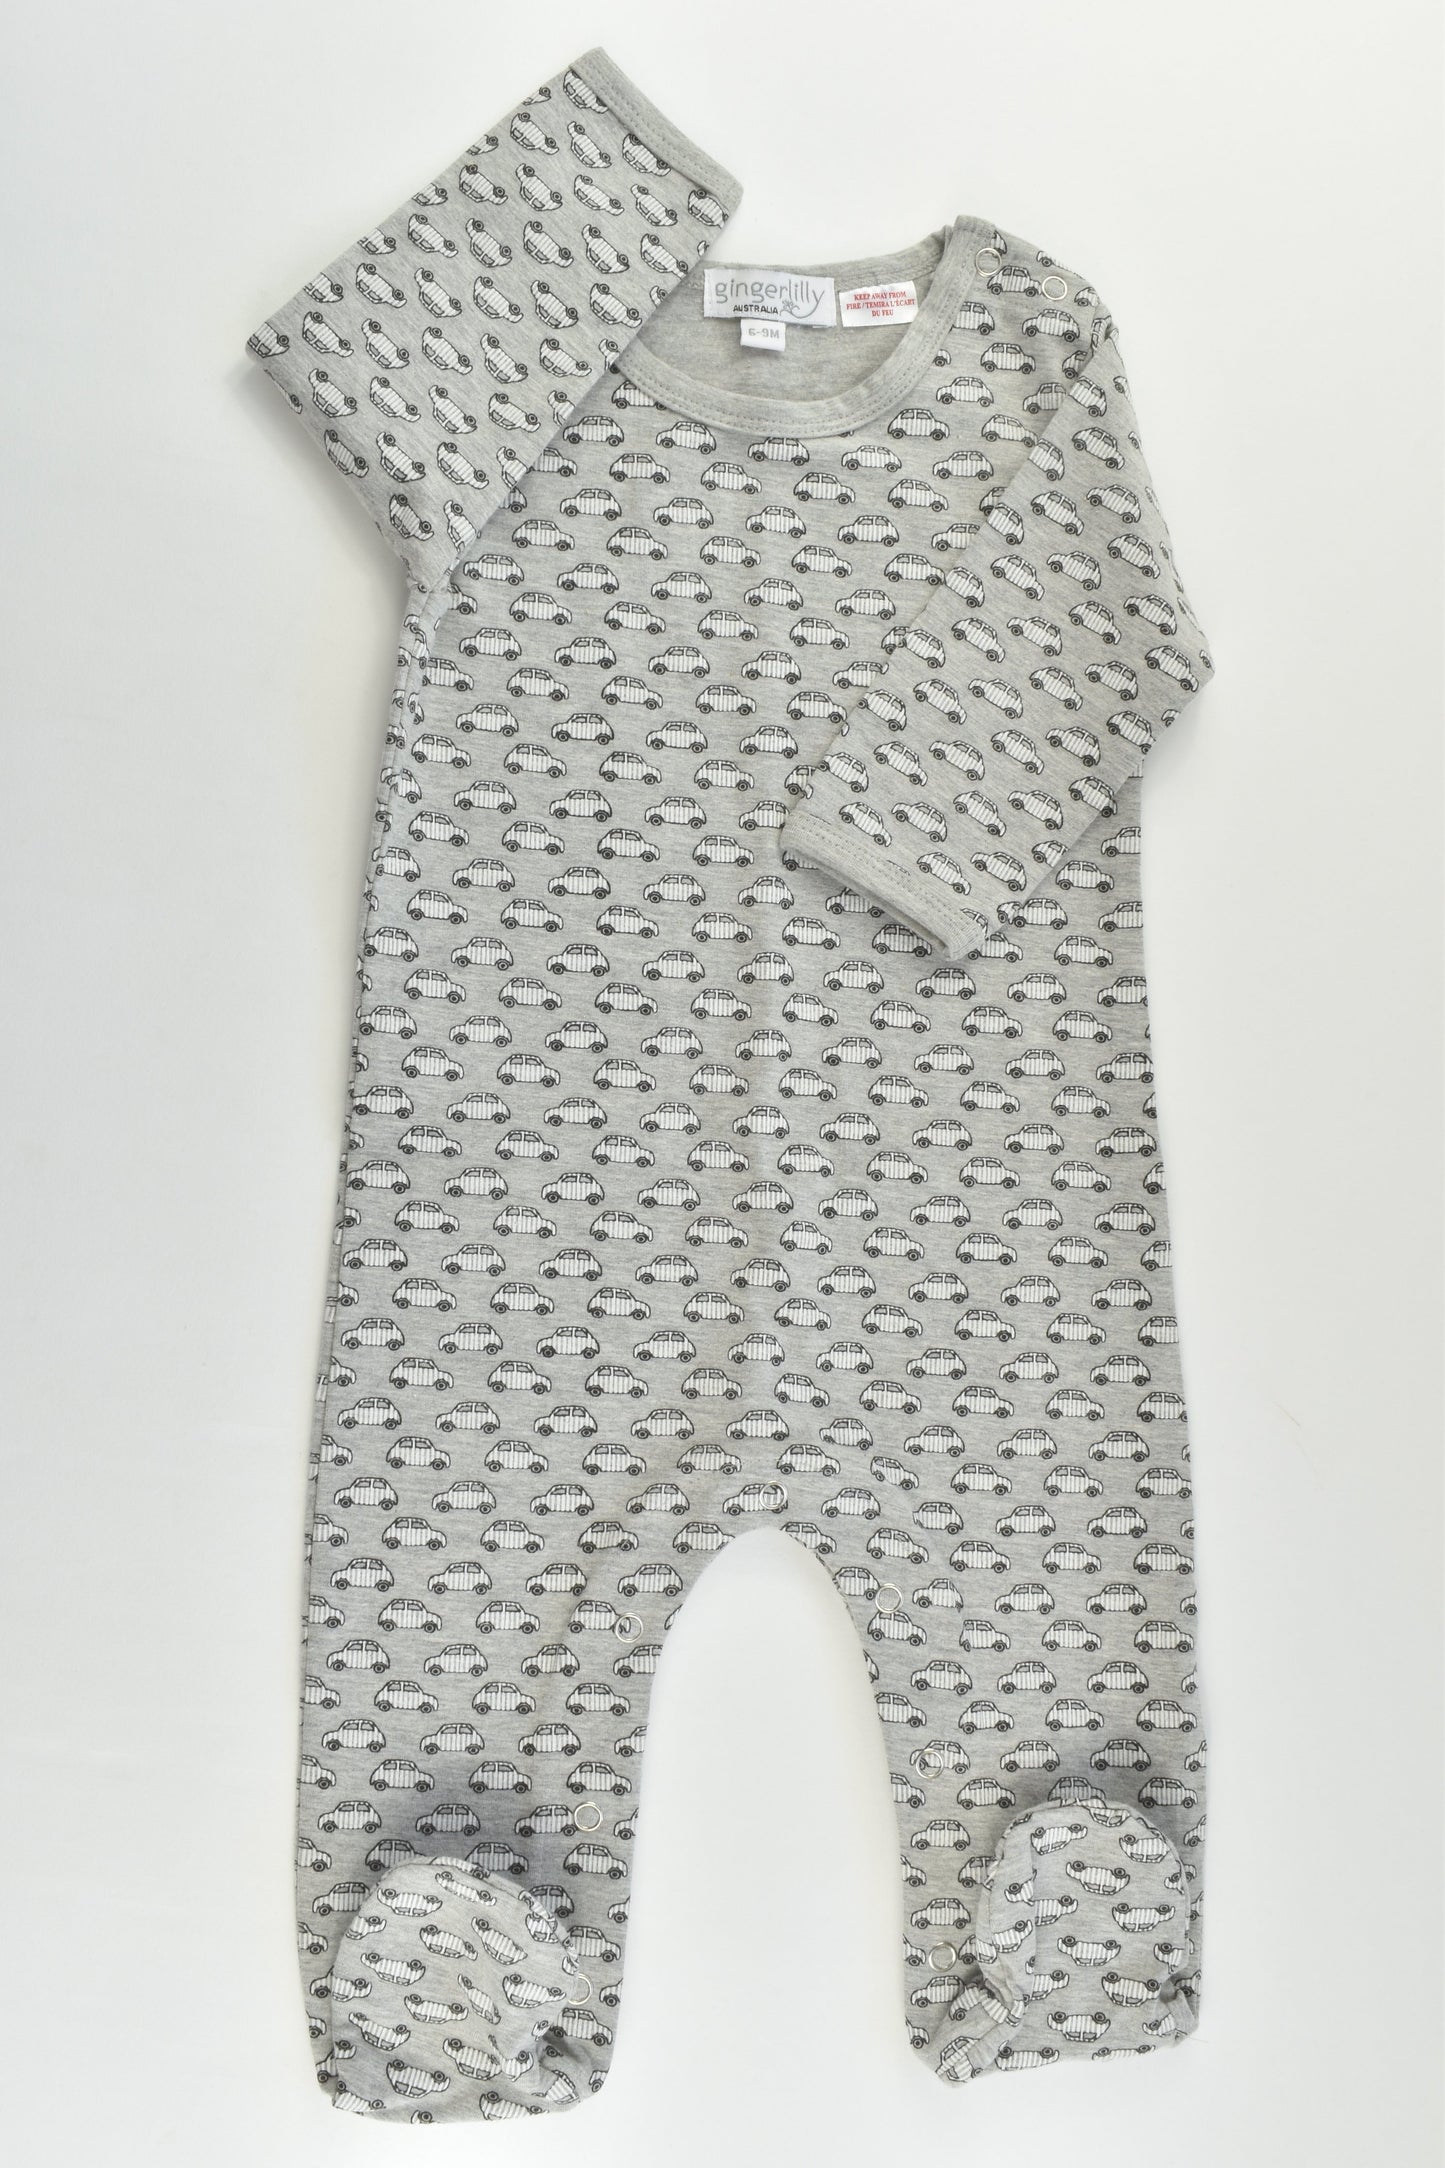 NEW Gingerlilly (AU) Size 0 (6-9 months) Cars Footed Romper